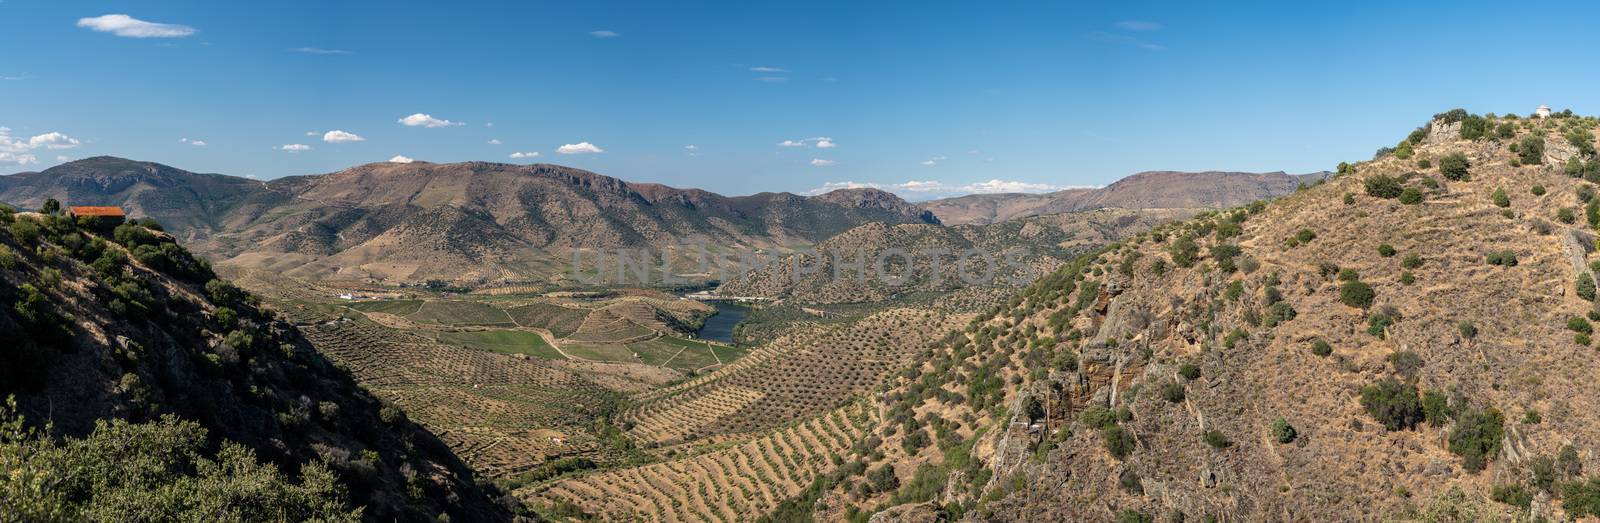 Panorama over vineyards for port wine production line the hillsides of the Douro valley at Barca de Alva in Portugal